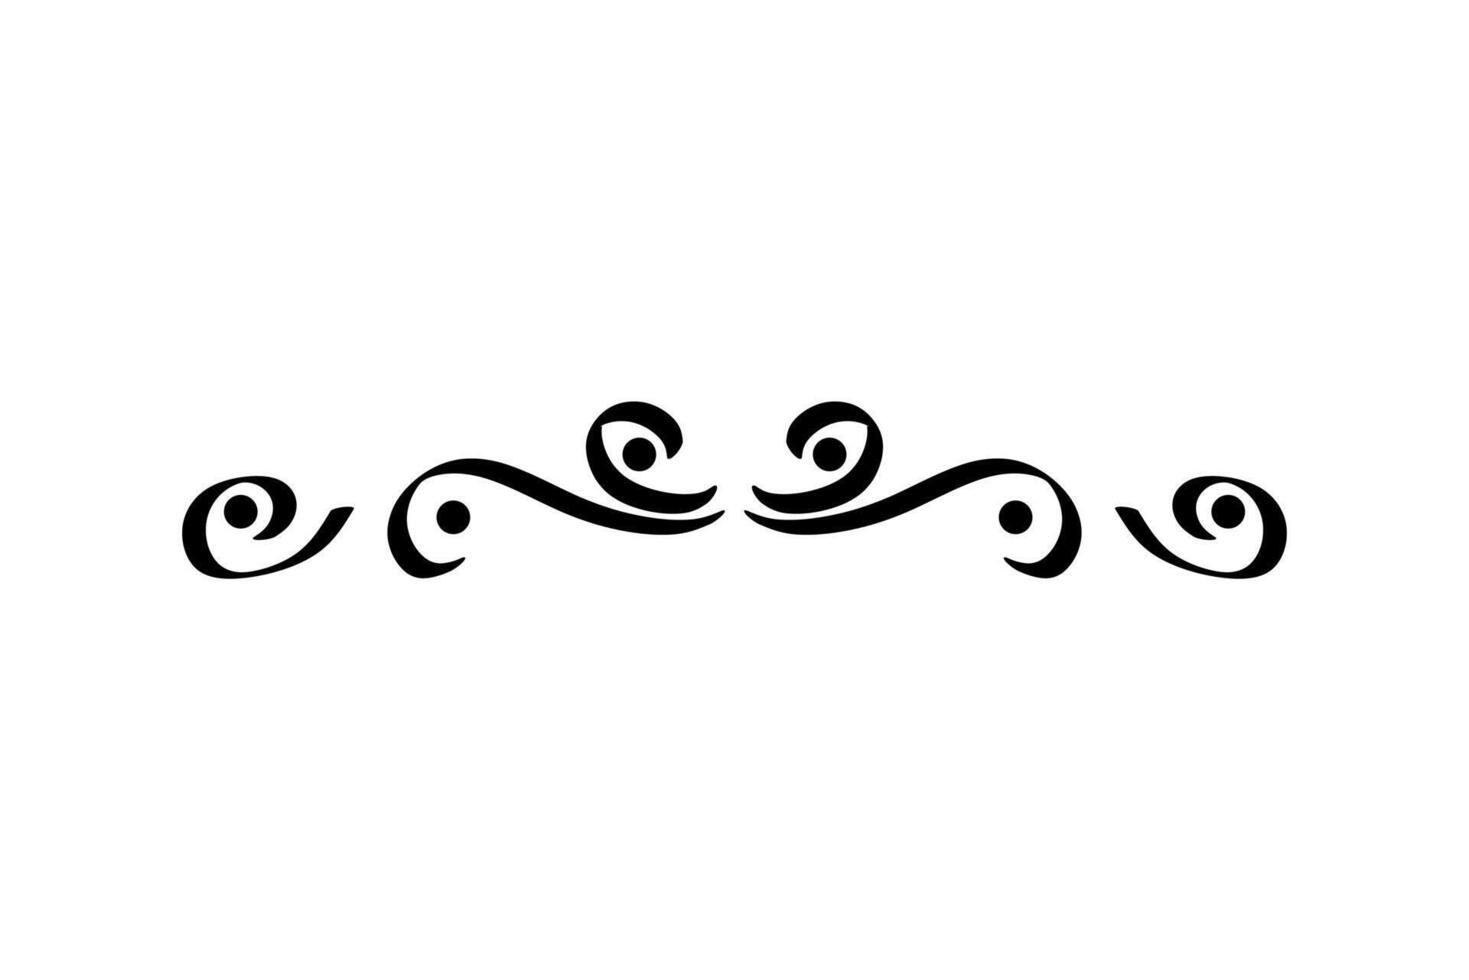 Vector Divider Style Noveau Ornament Isolated Decorative on White Background